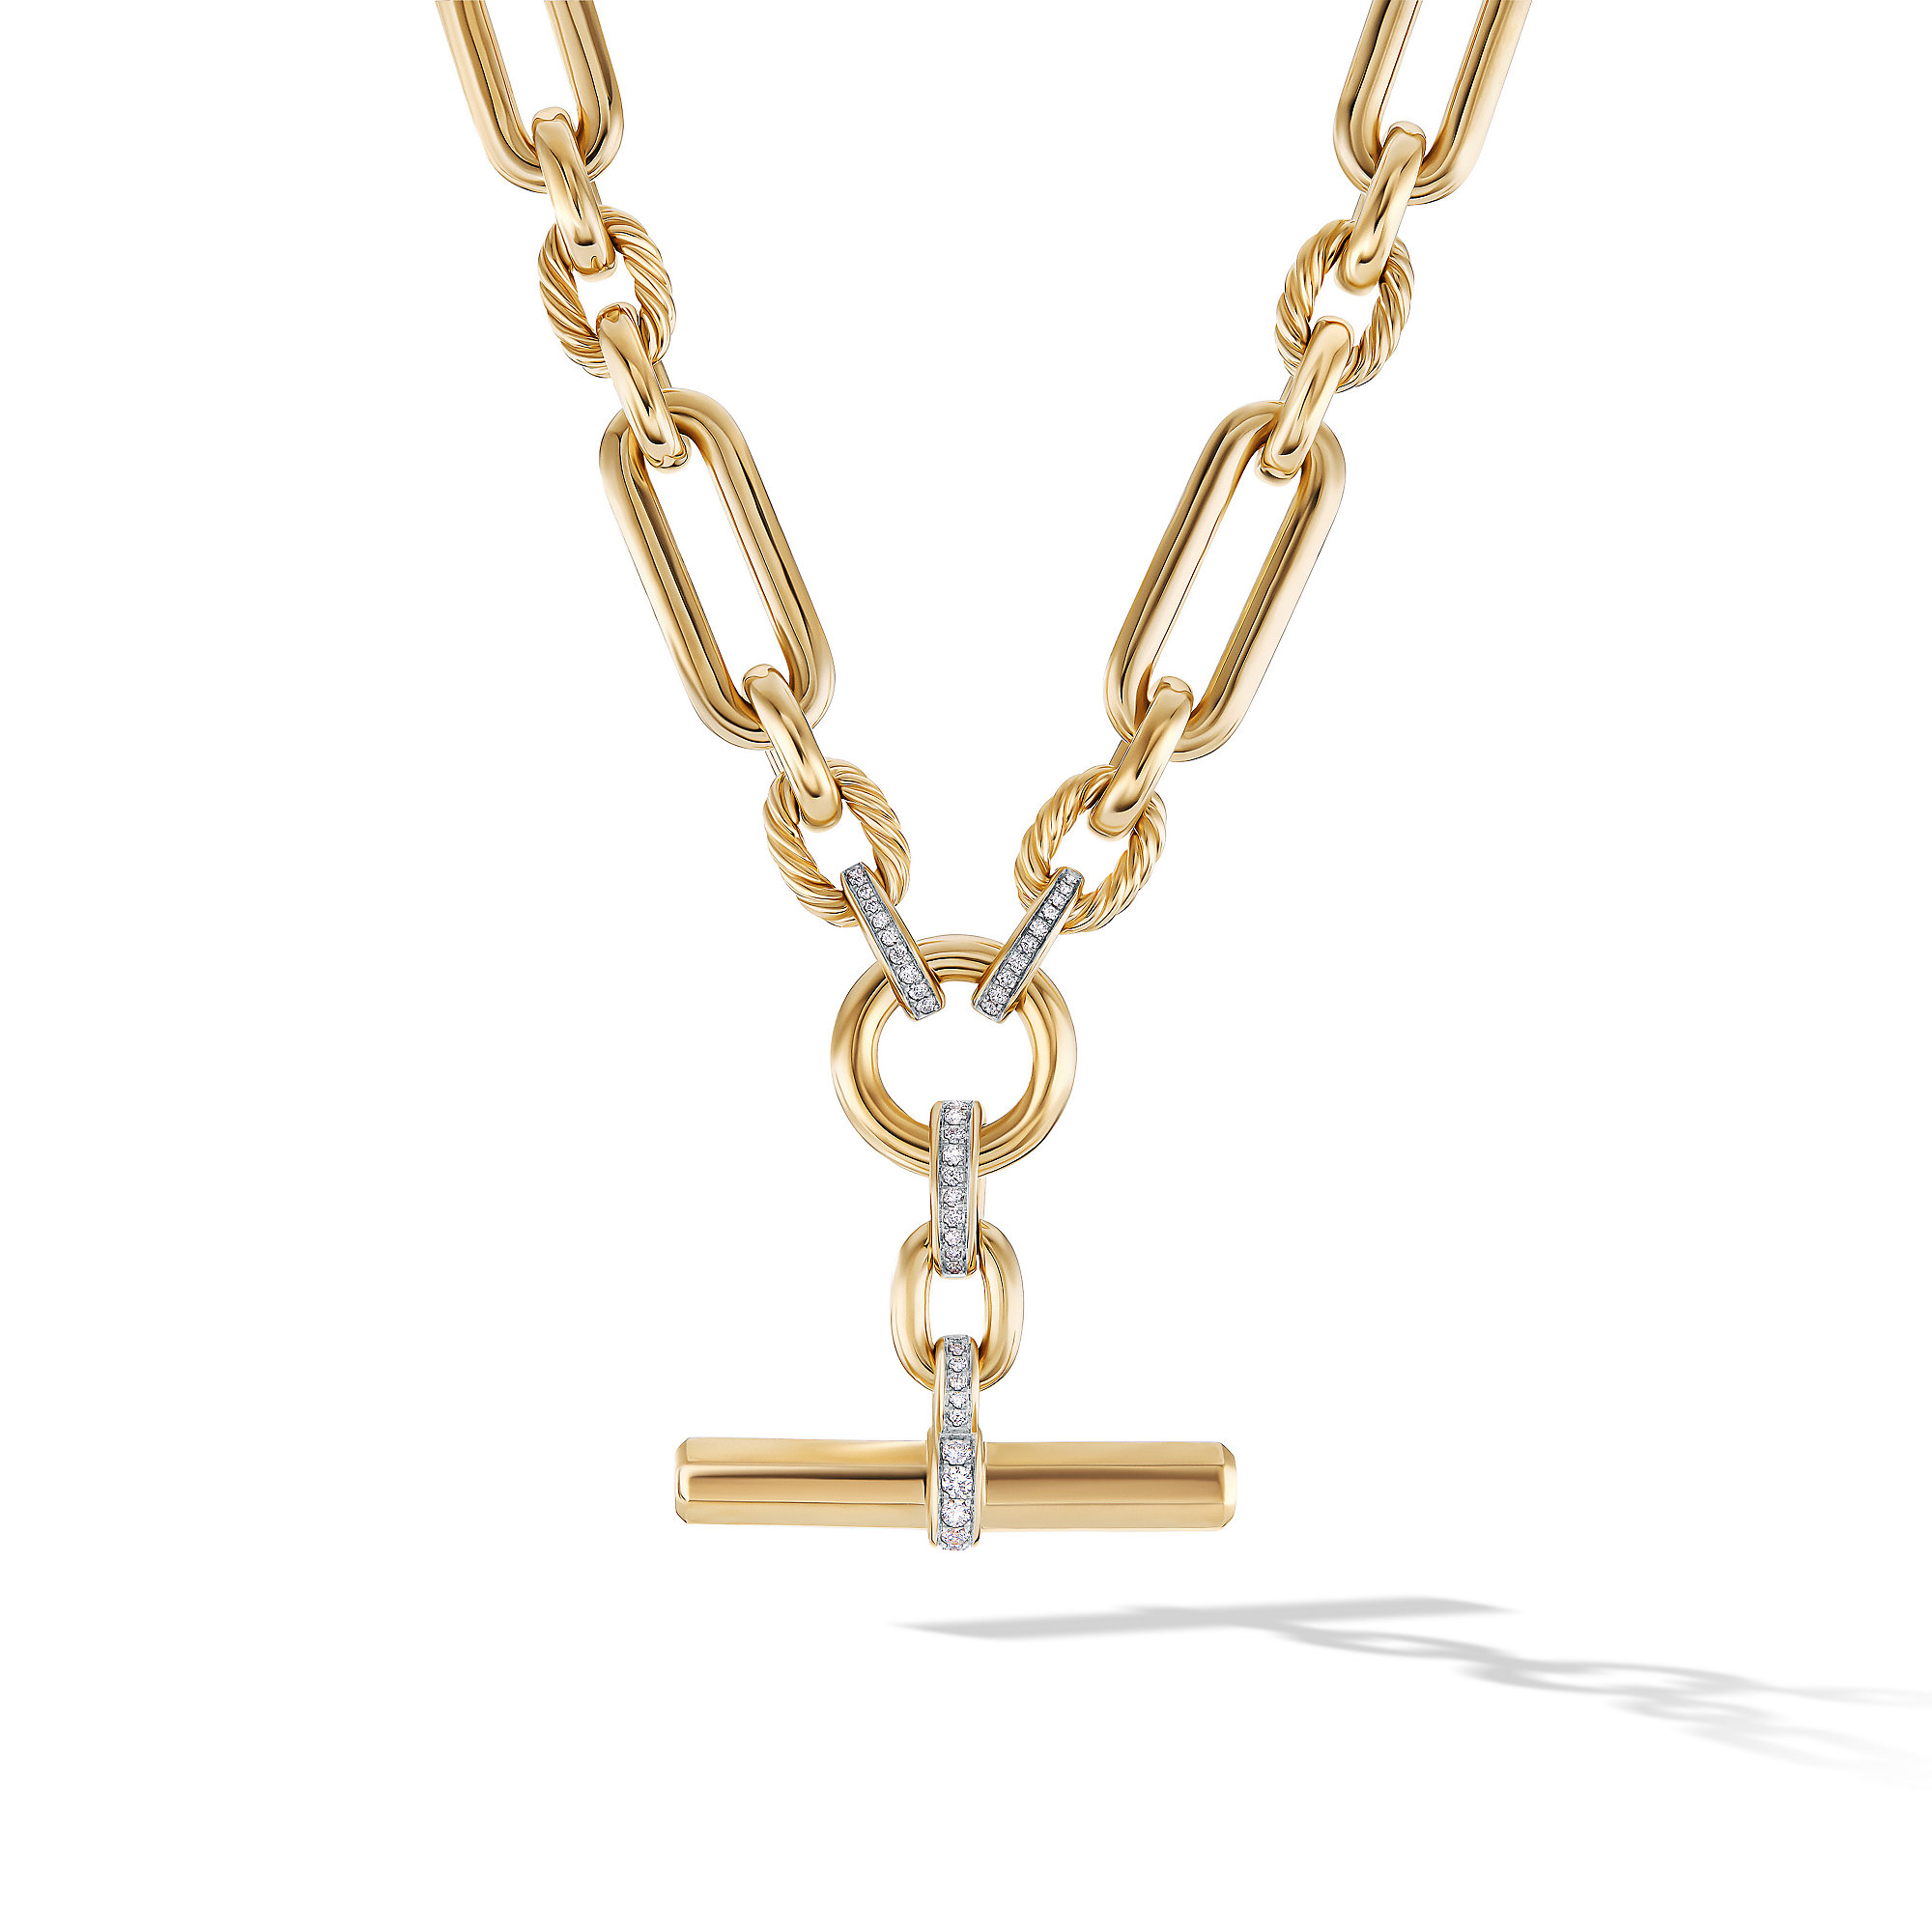 Lexington Chain Necklace in 18K Yellow Gold with Pave Diamonds